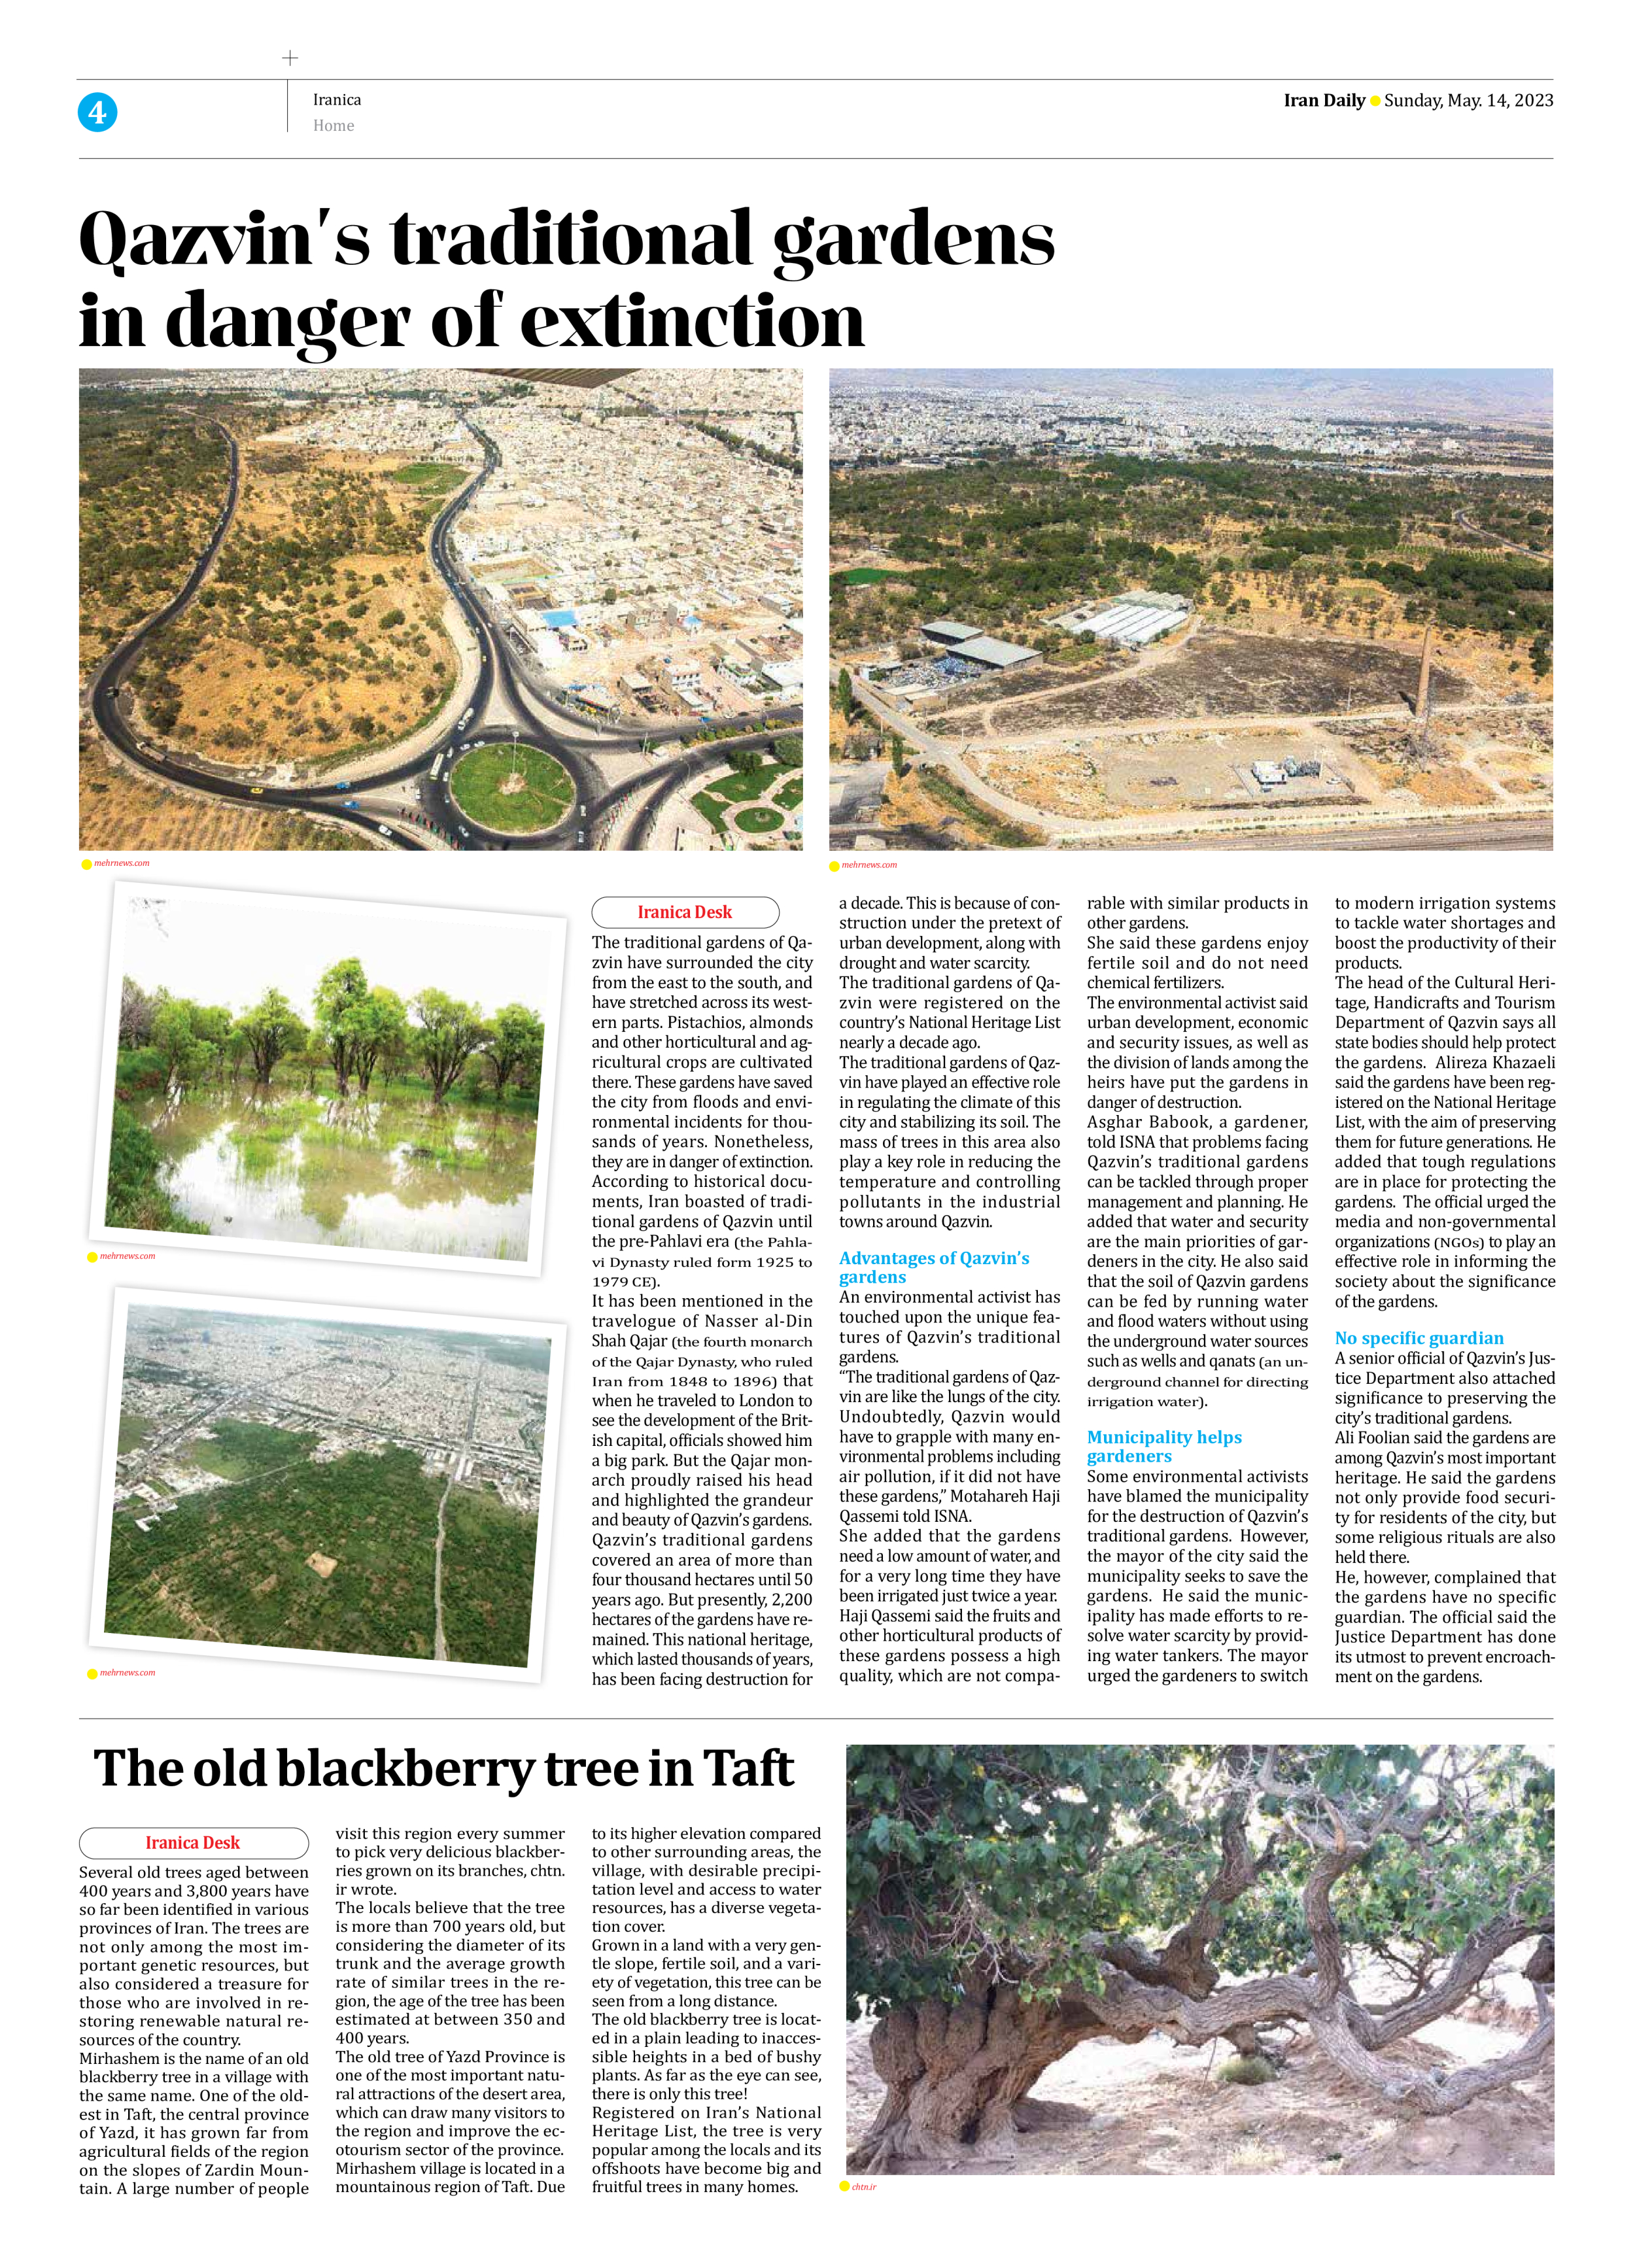 Iran Daily - Number Seven Thousand Two Hundred and Ninety One - 14 May 2023 - Page 4